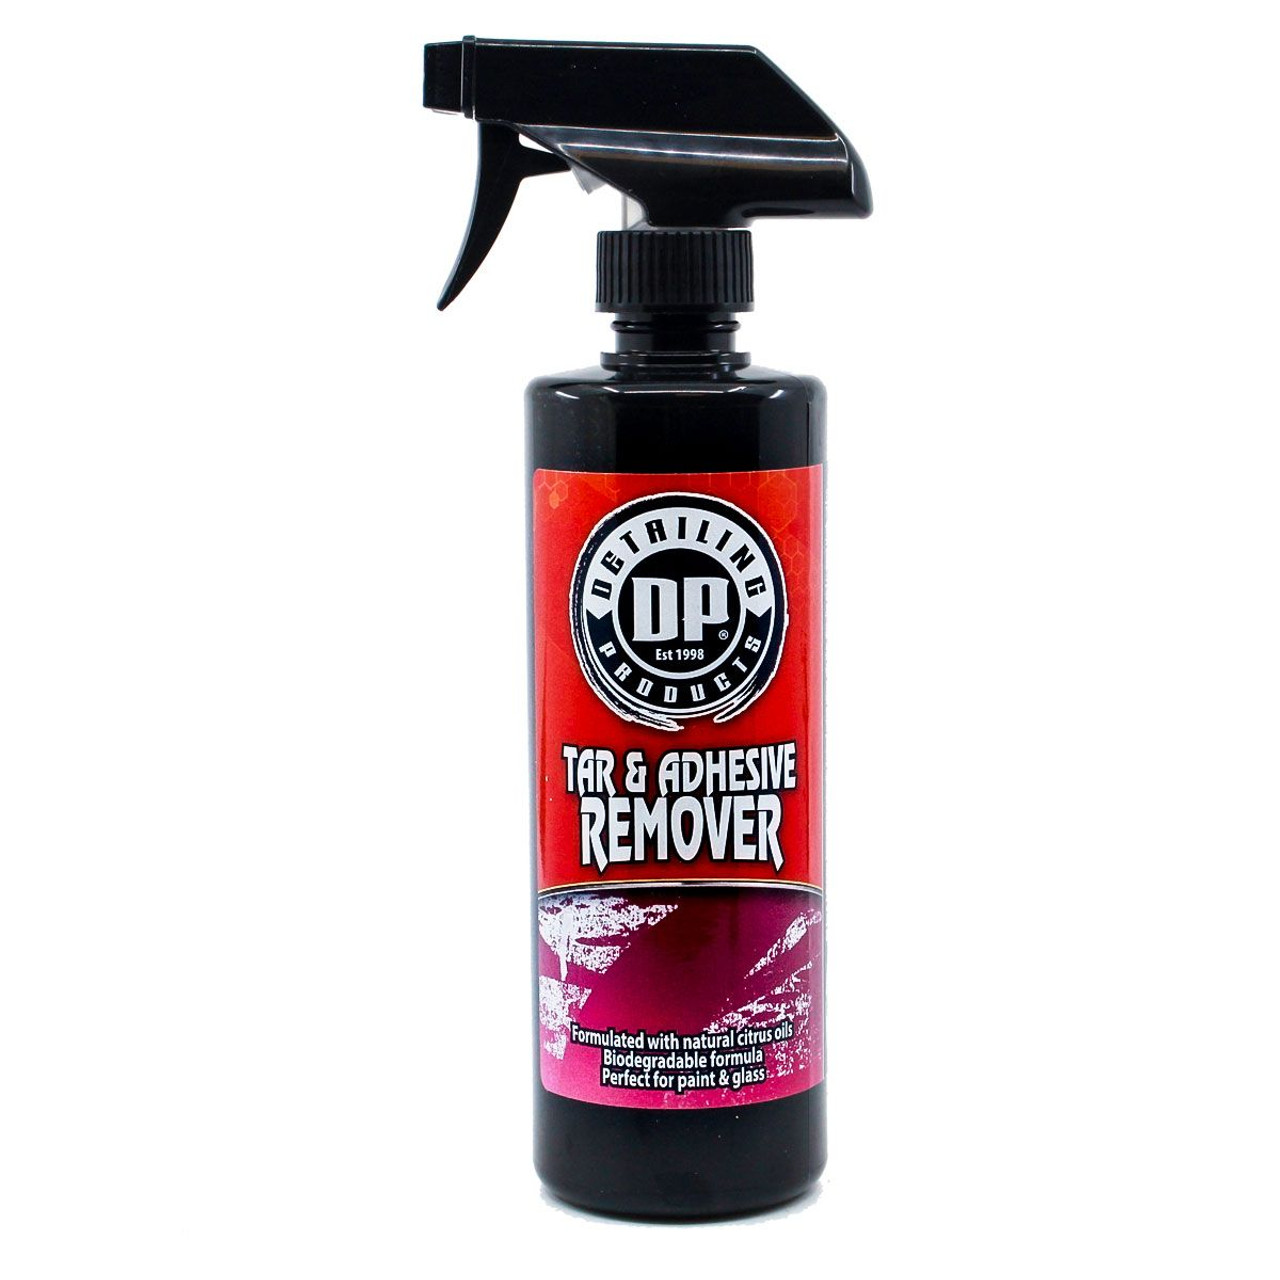 DP Detailing Products Tar & Adhesive Remover